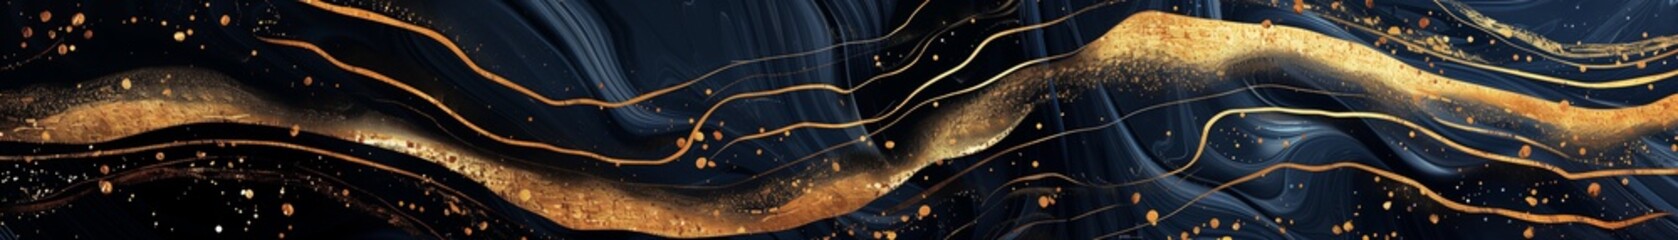 elegant navy and gold marble background